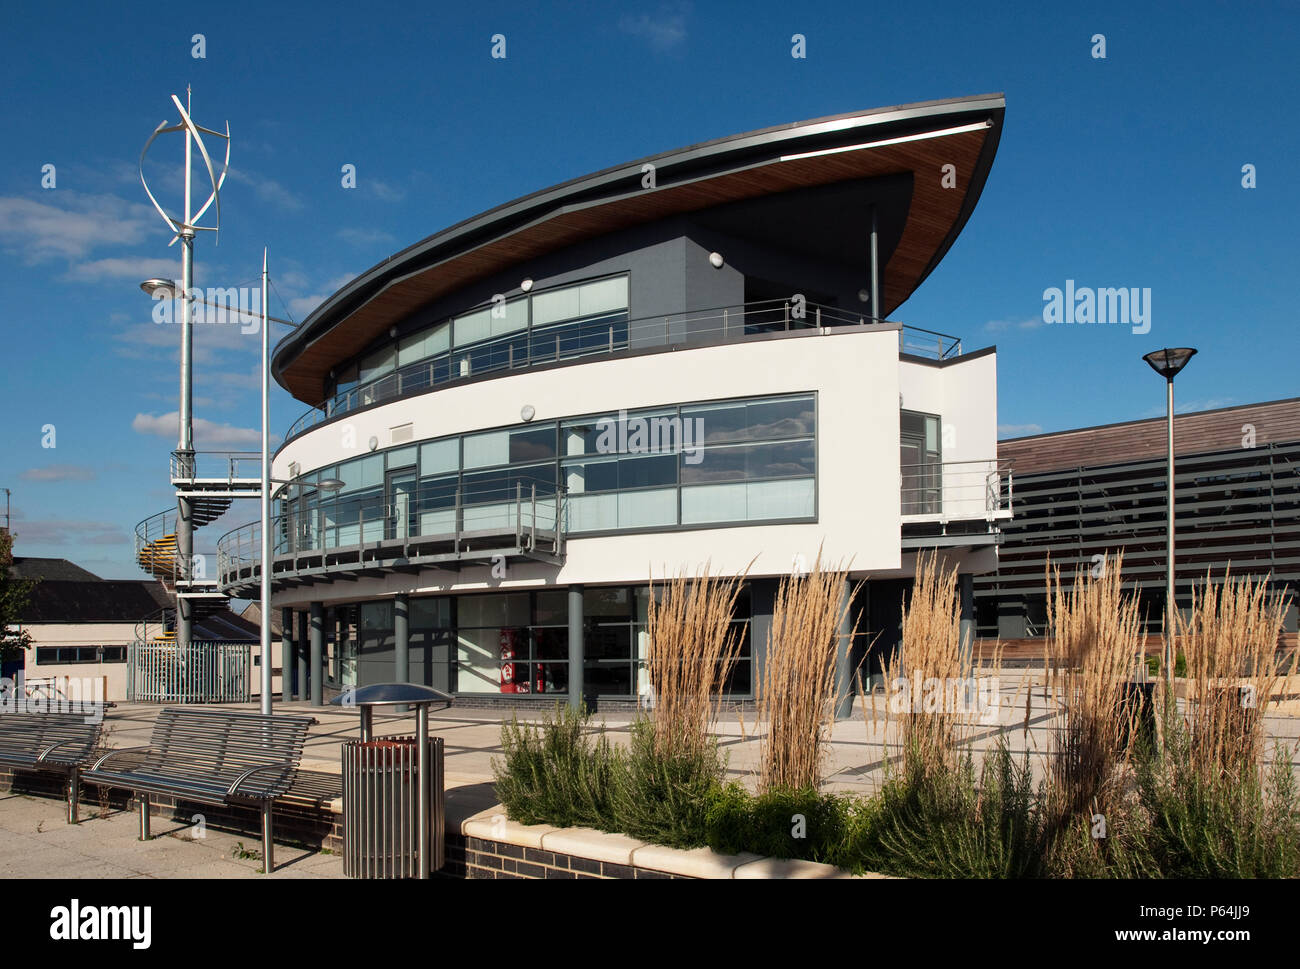 Wisbech Boathouse with Vertical axis wind turbine (VAWT), part of the Nene Waterfront Regeneration in Wisbech, Cambridgeshire, UK Stock Photo